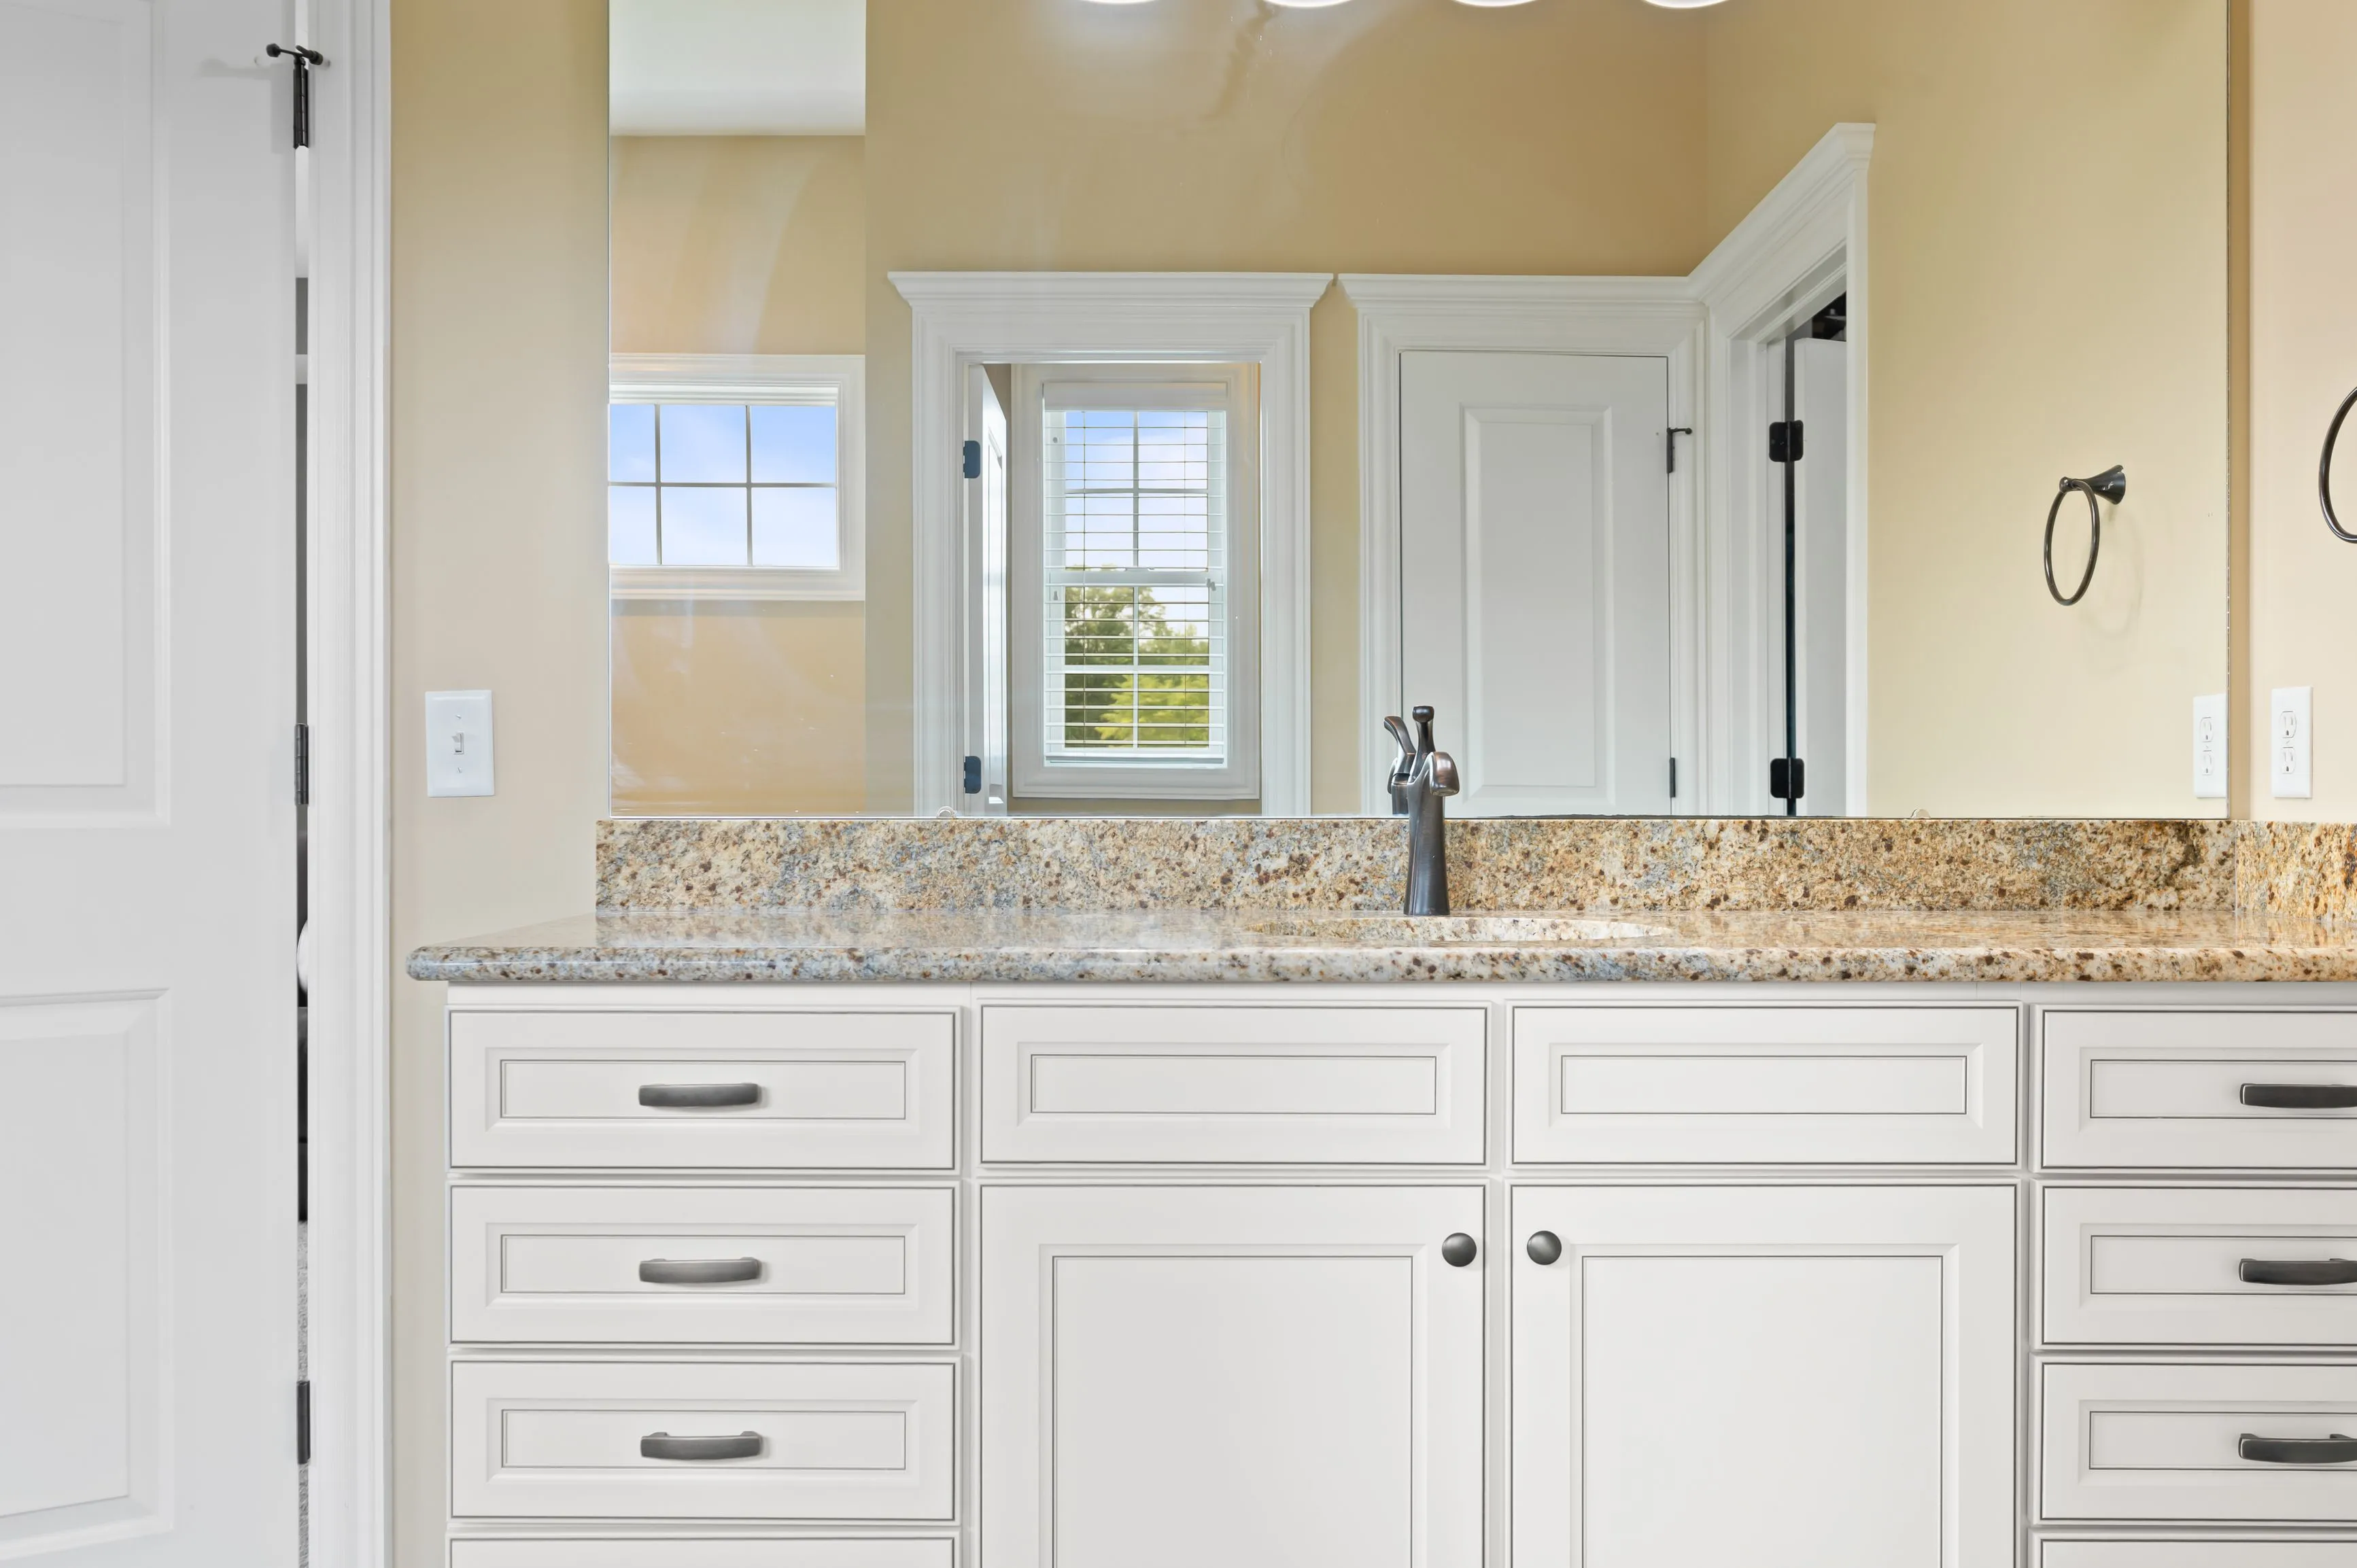 Modern bathroom interior with granite countertop, white cabinets, and a small window.